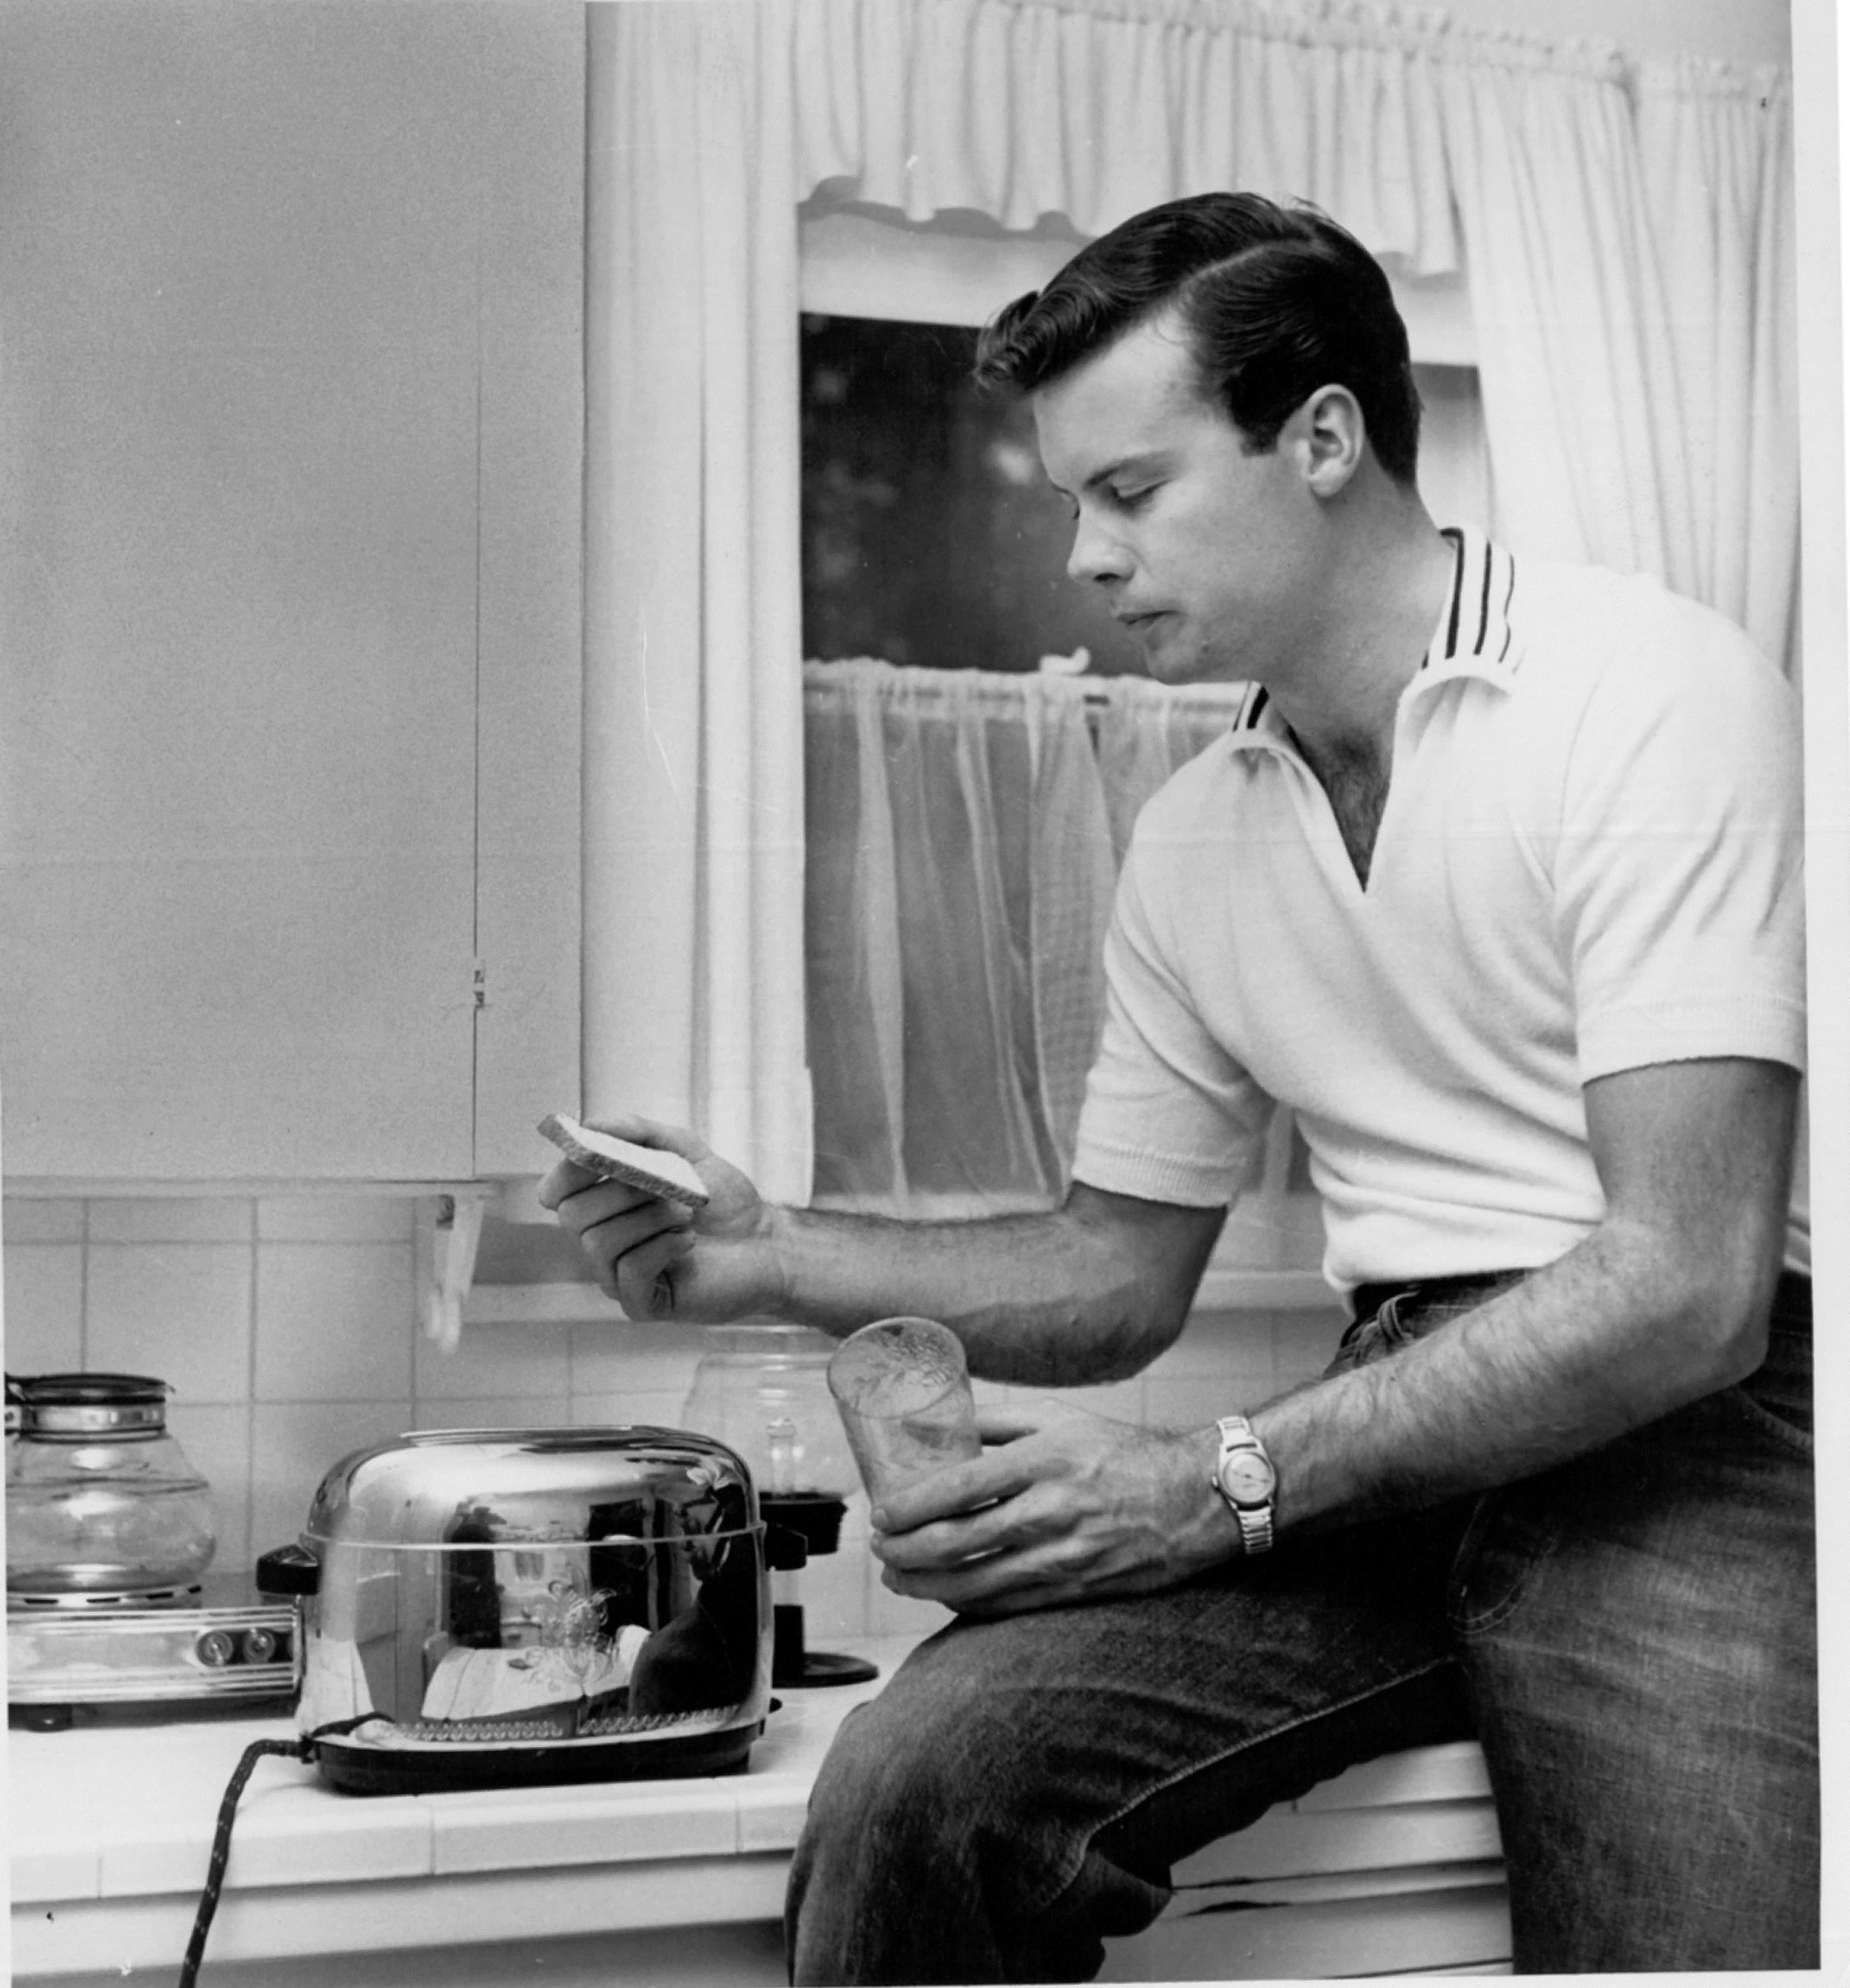  Bob, c. Jan. 1955  Photo: Larry Barberi for Globe Photos, New York City. “Weekend with the Folks”/”A Day to Loaf,”  Screenplay , July 1955. 